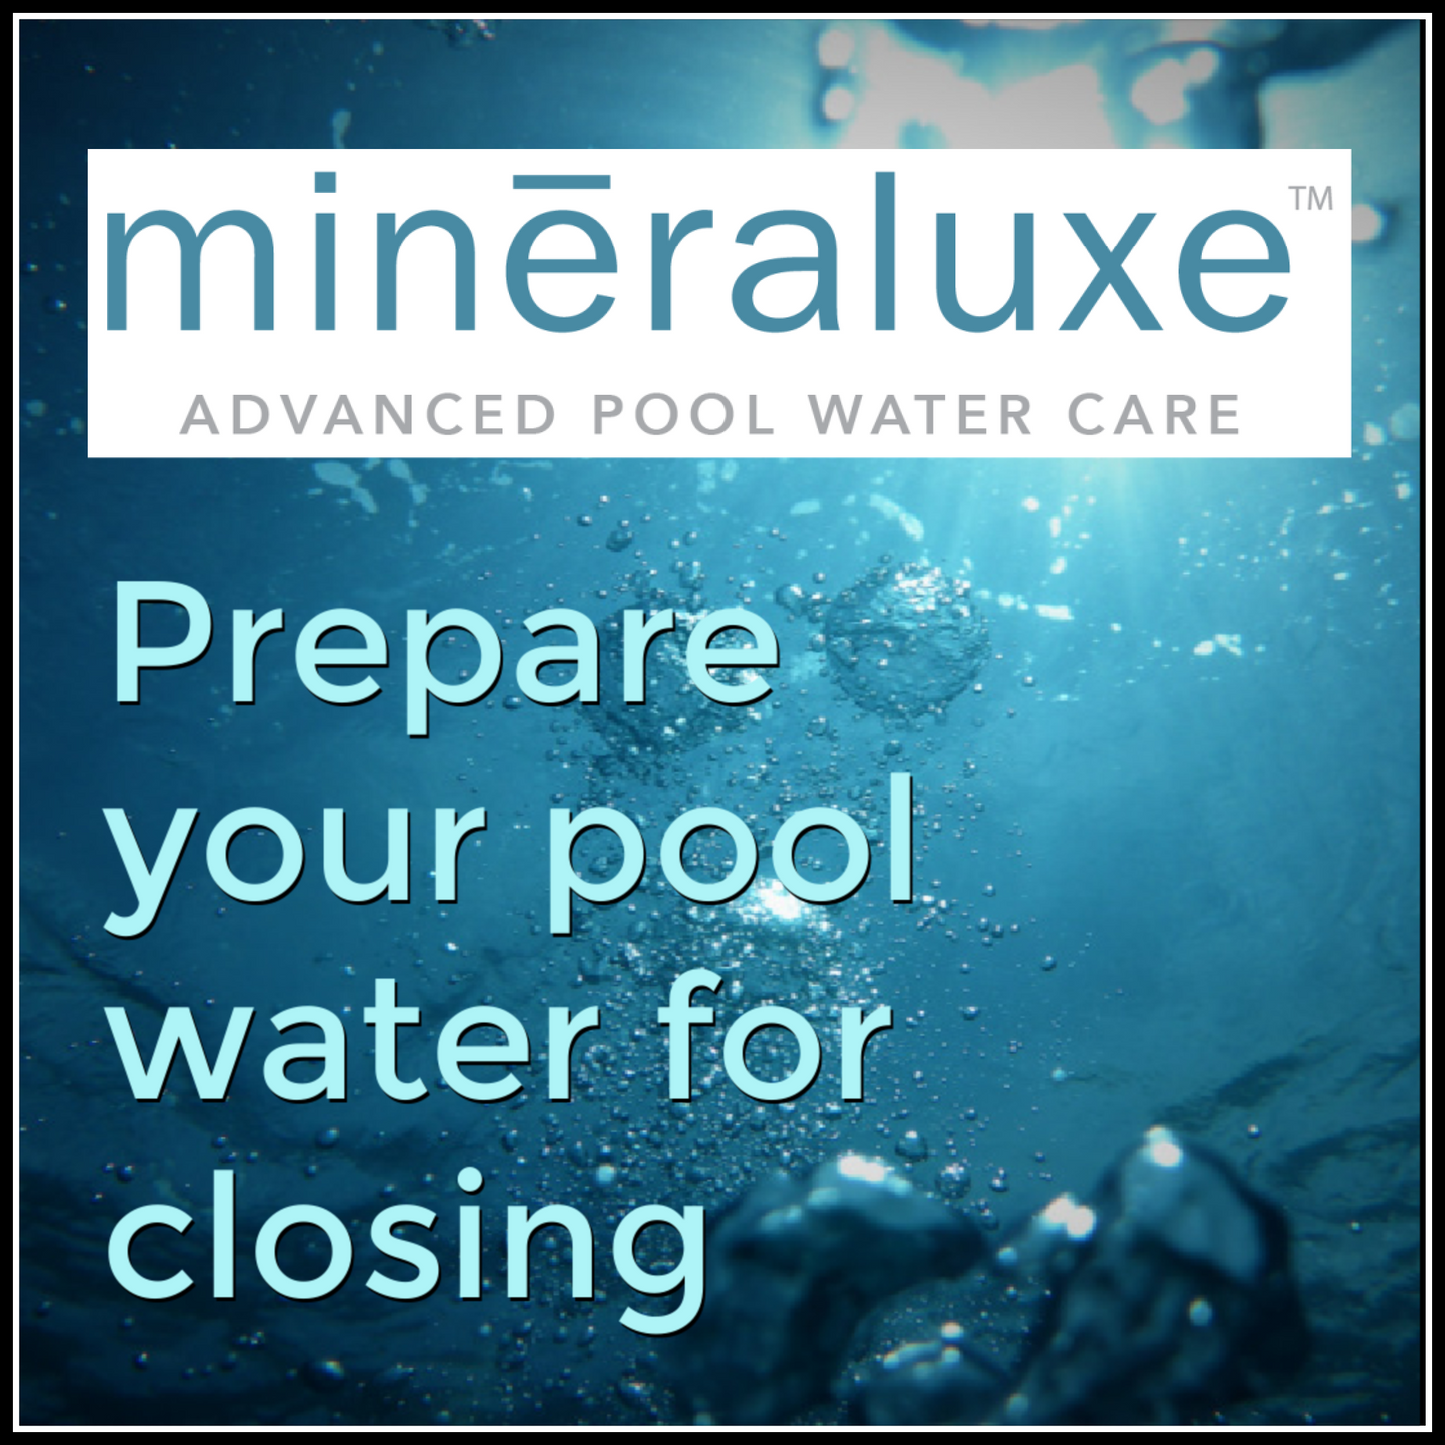 Pool Closing Video for Mineraluxe Pools